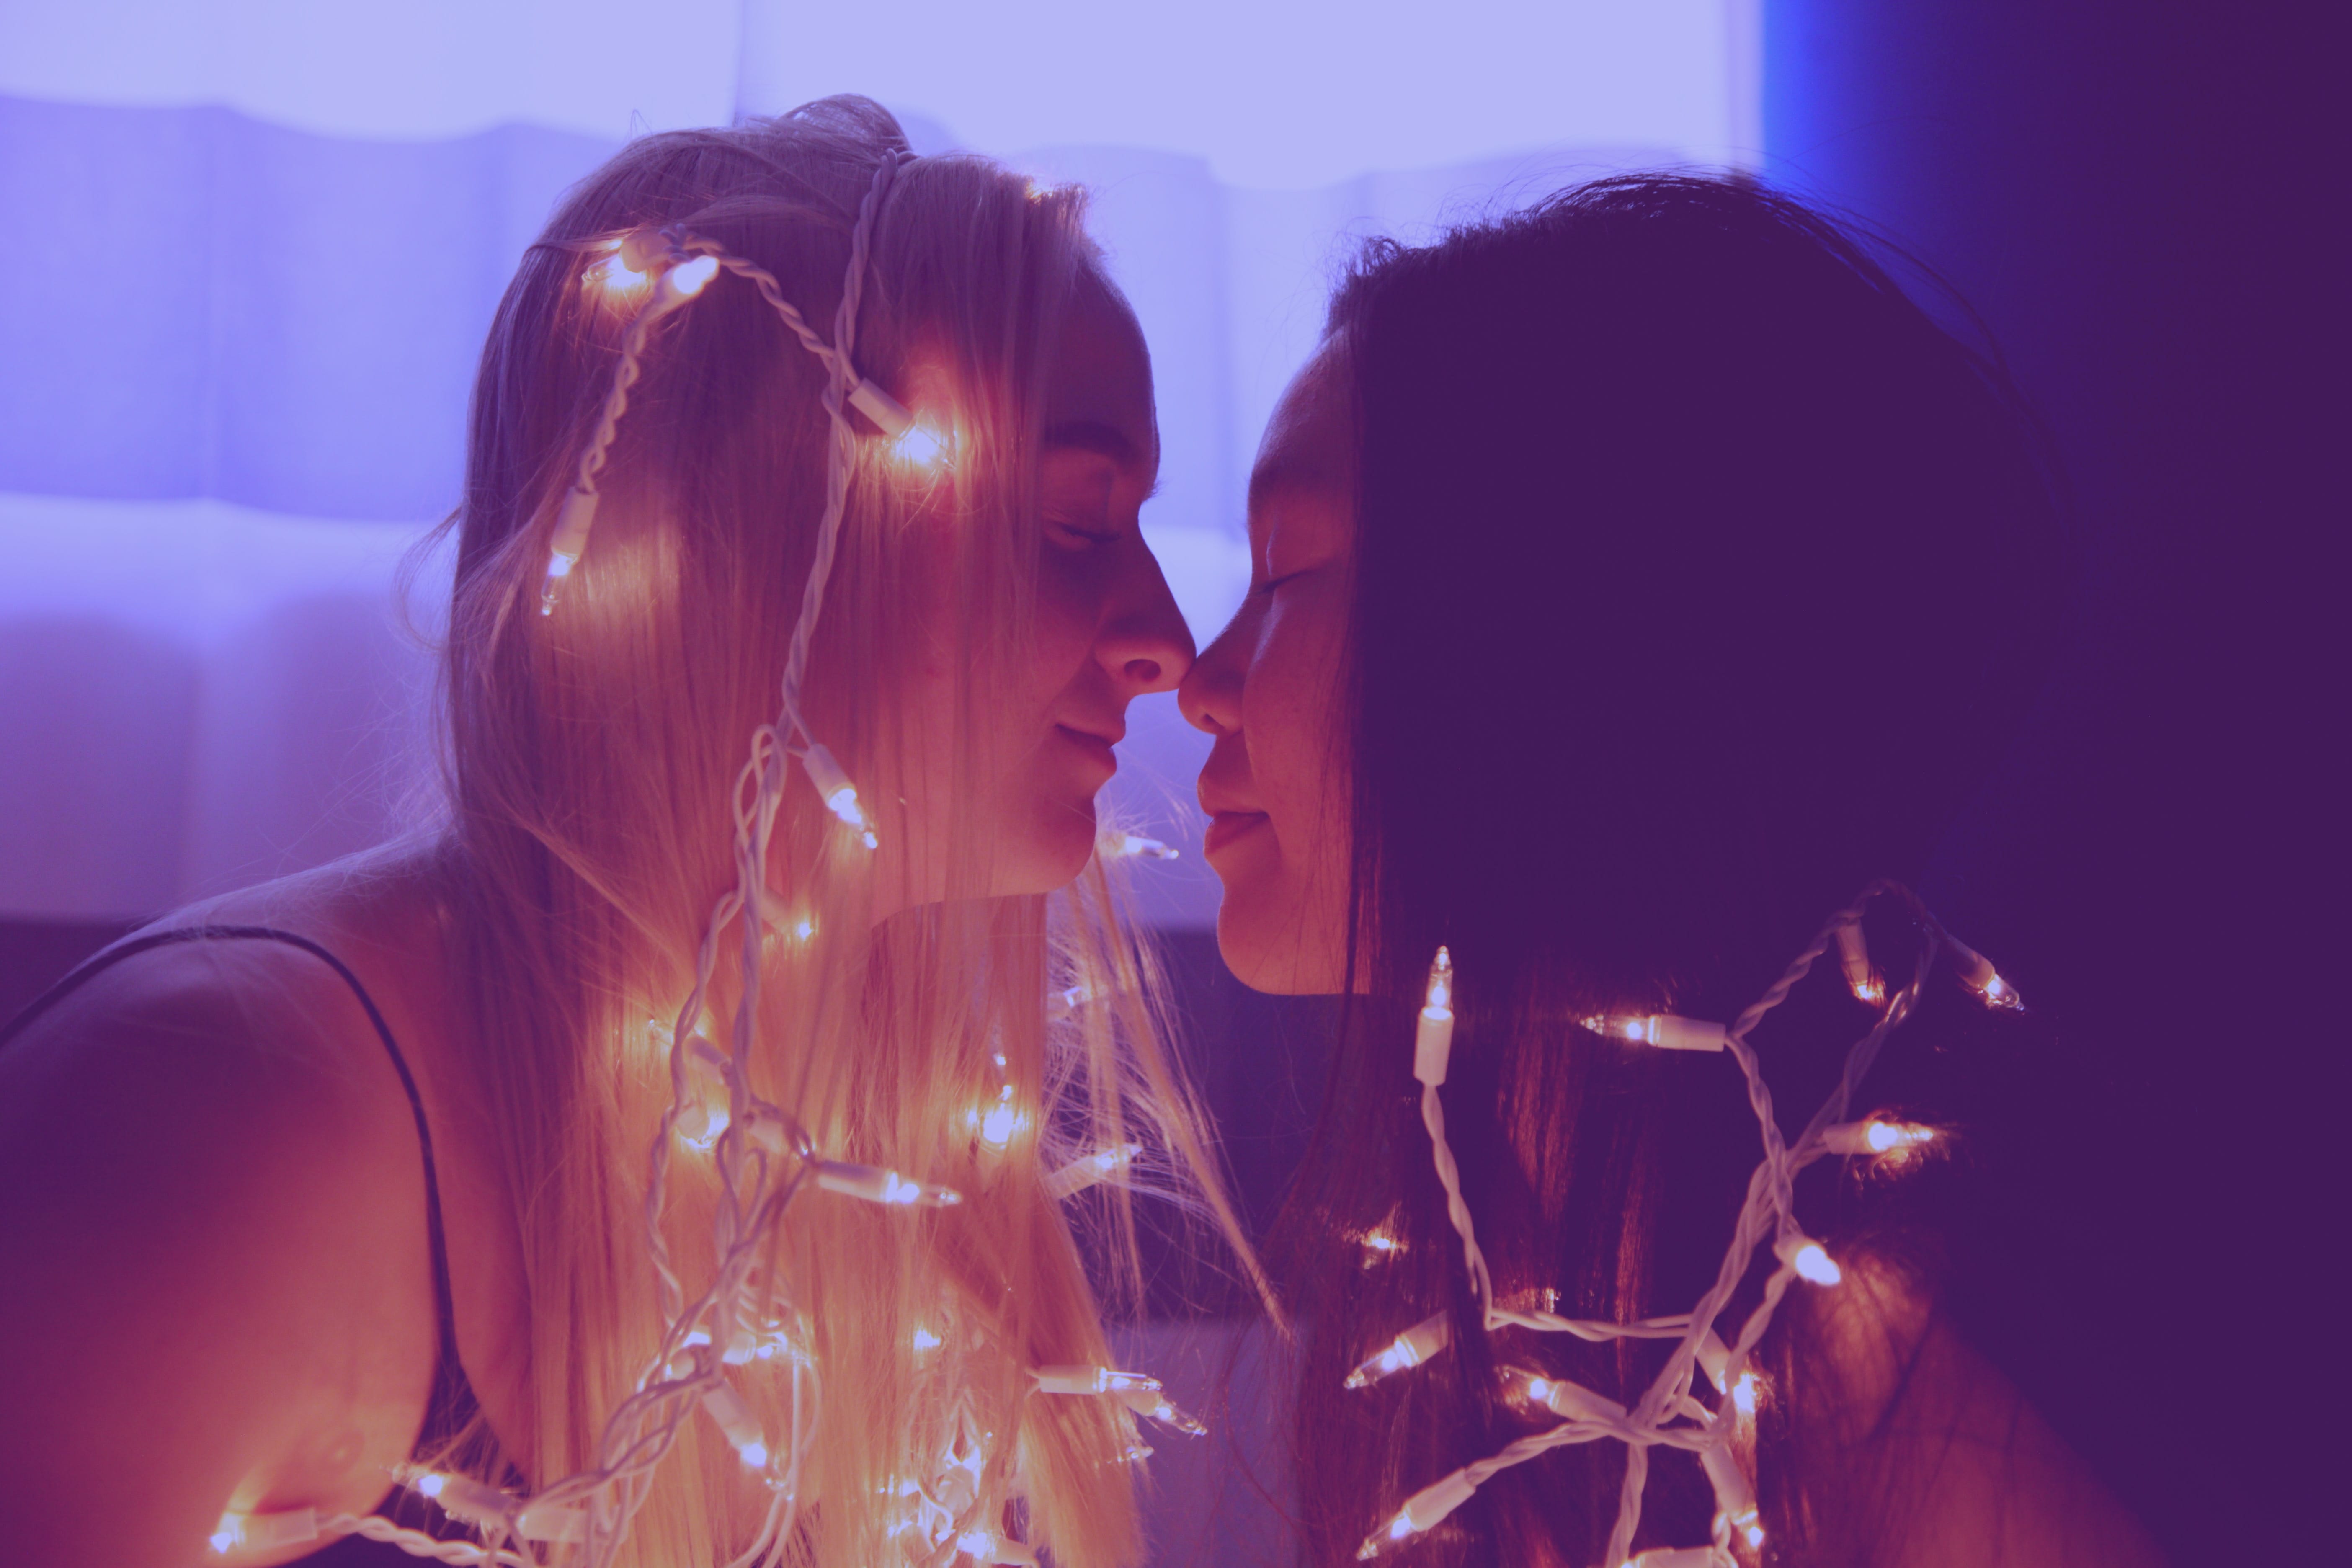 Girls touching noses in christmas lights